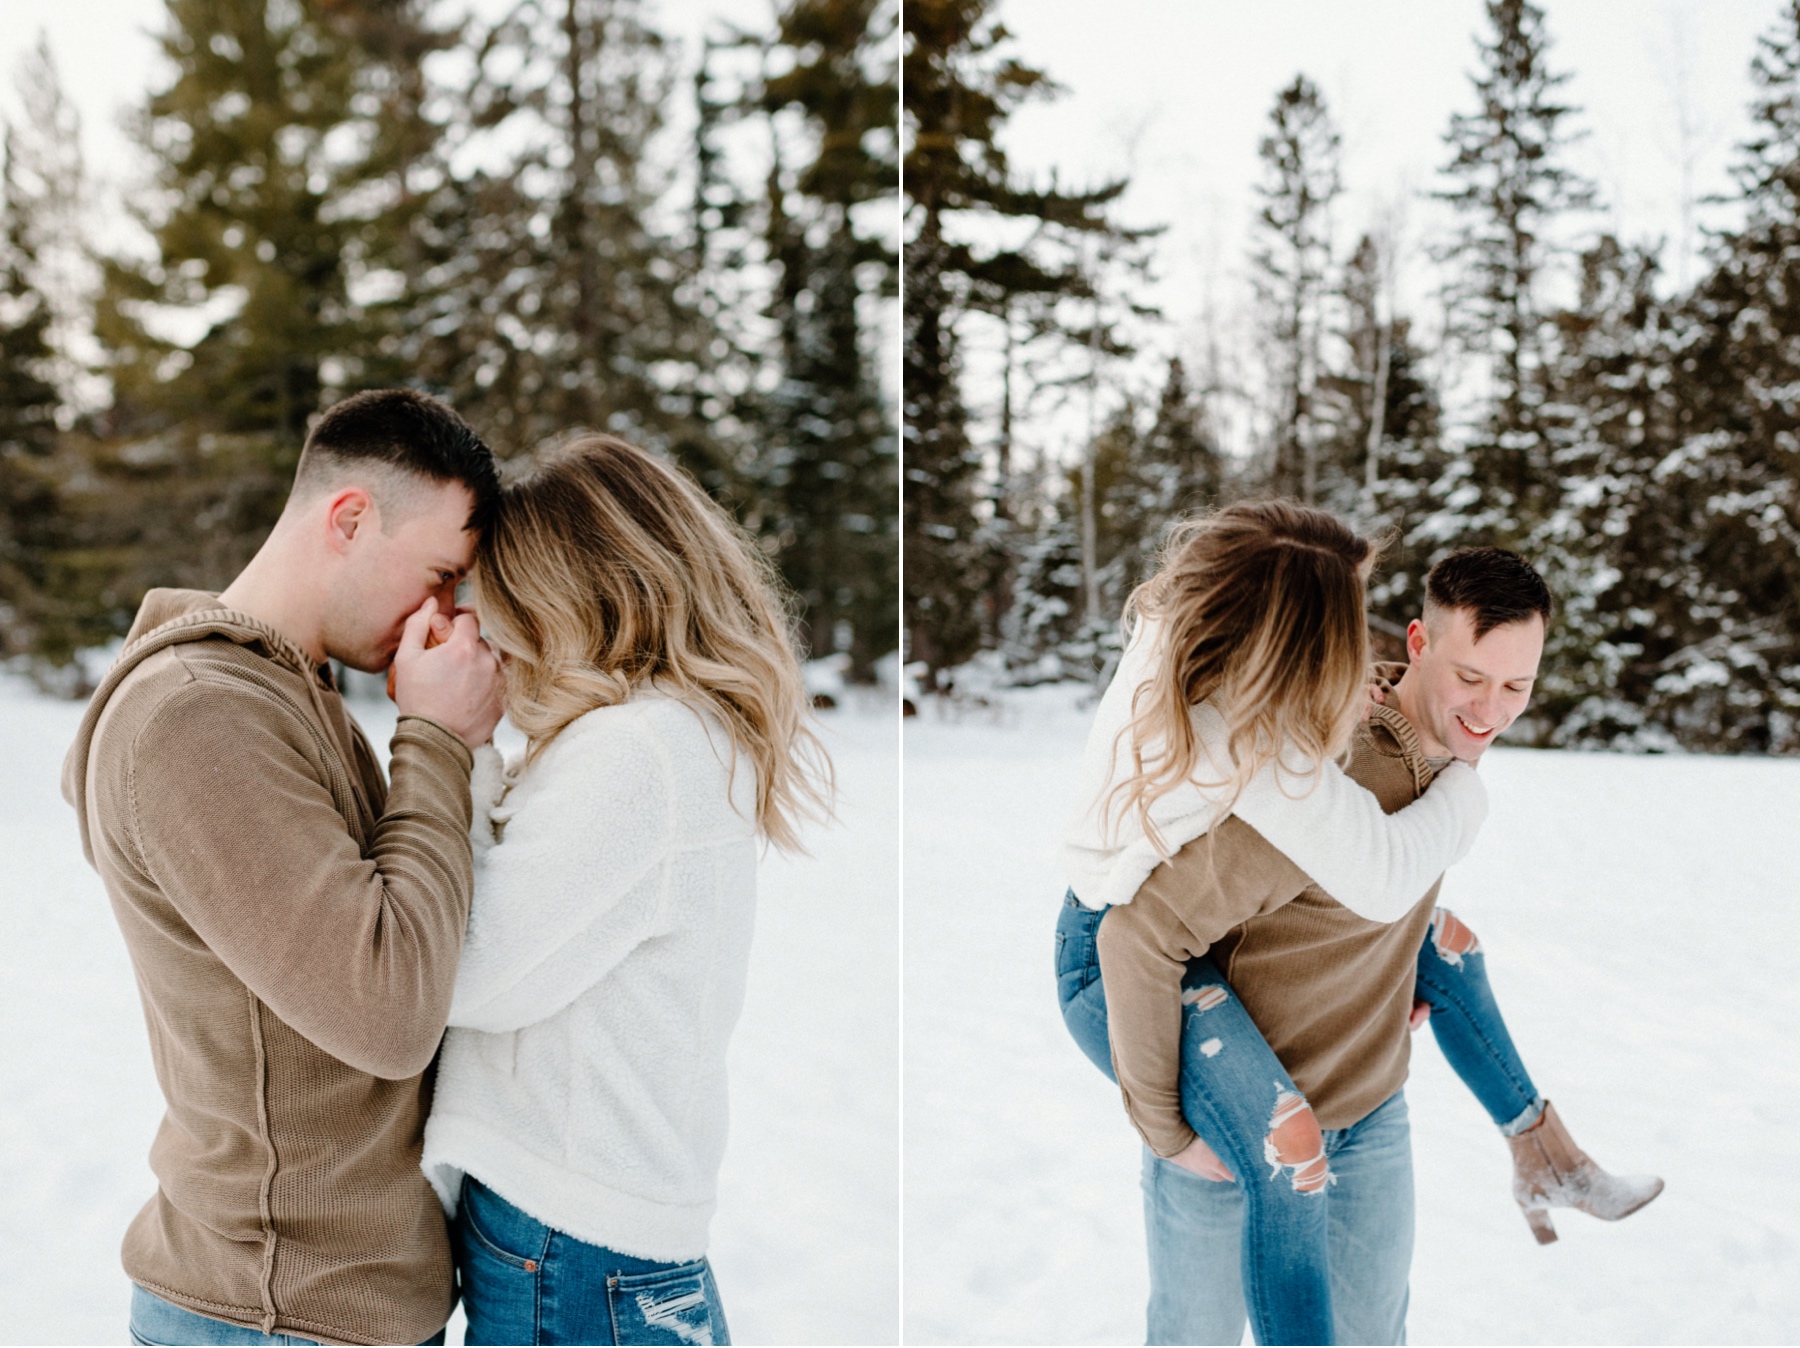 Couple laughing and posing in a snowy landscape